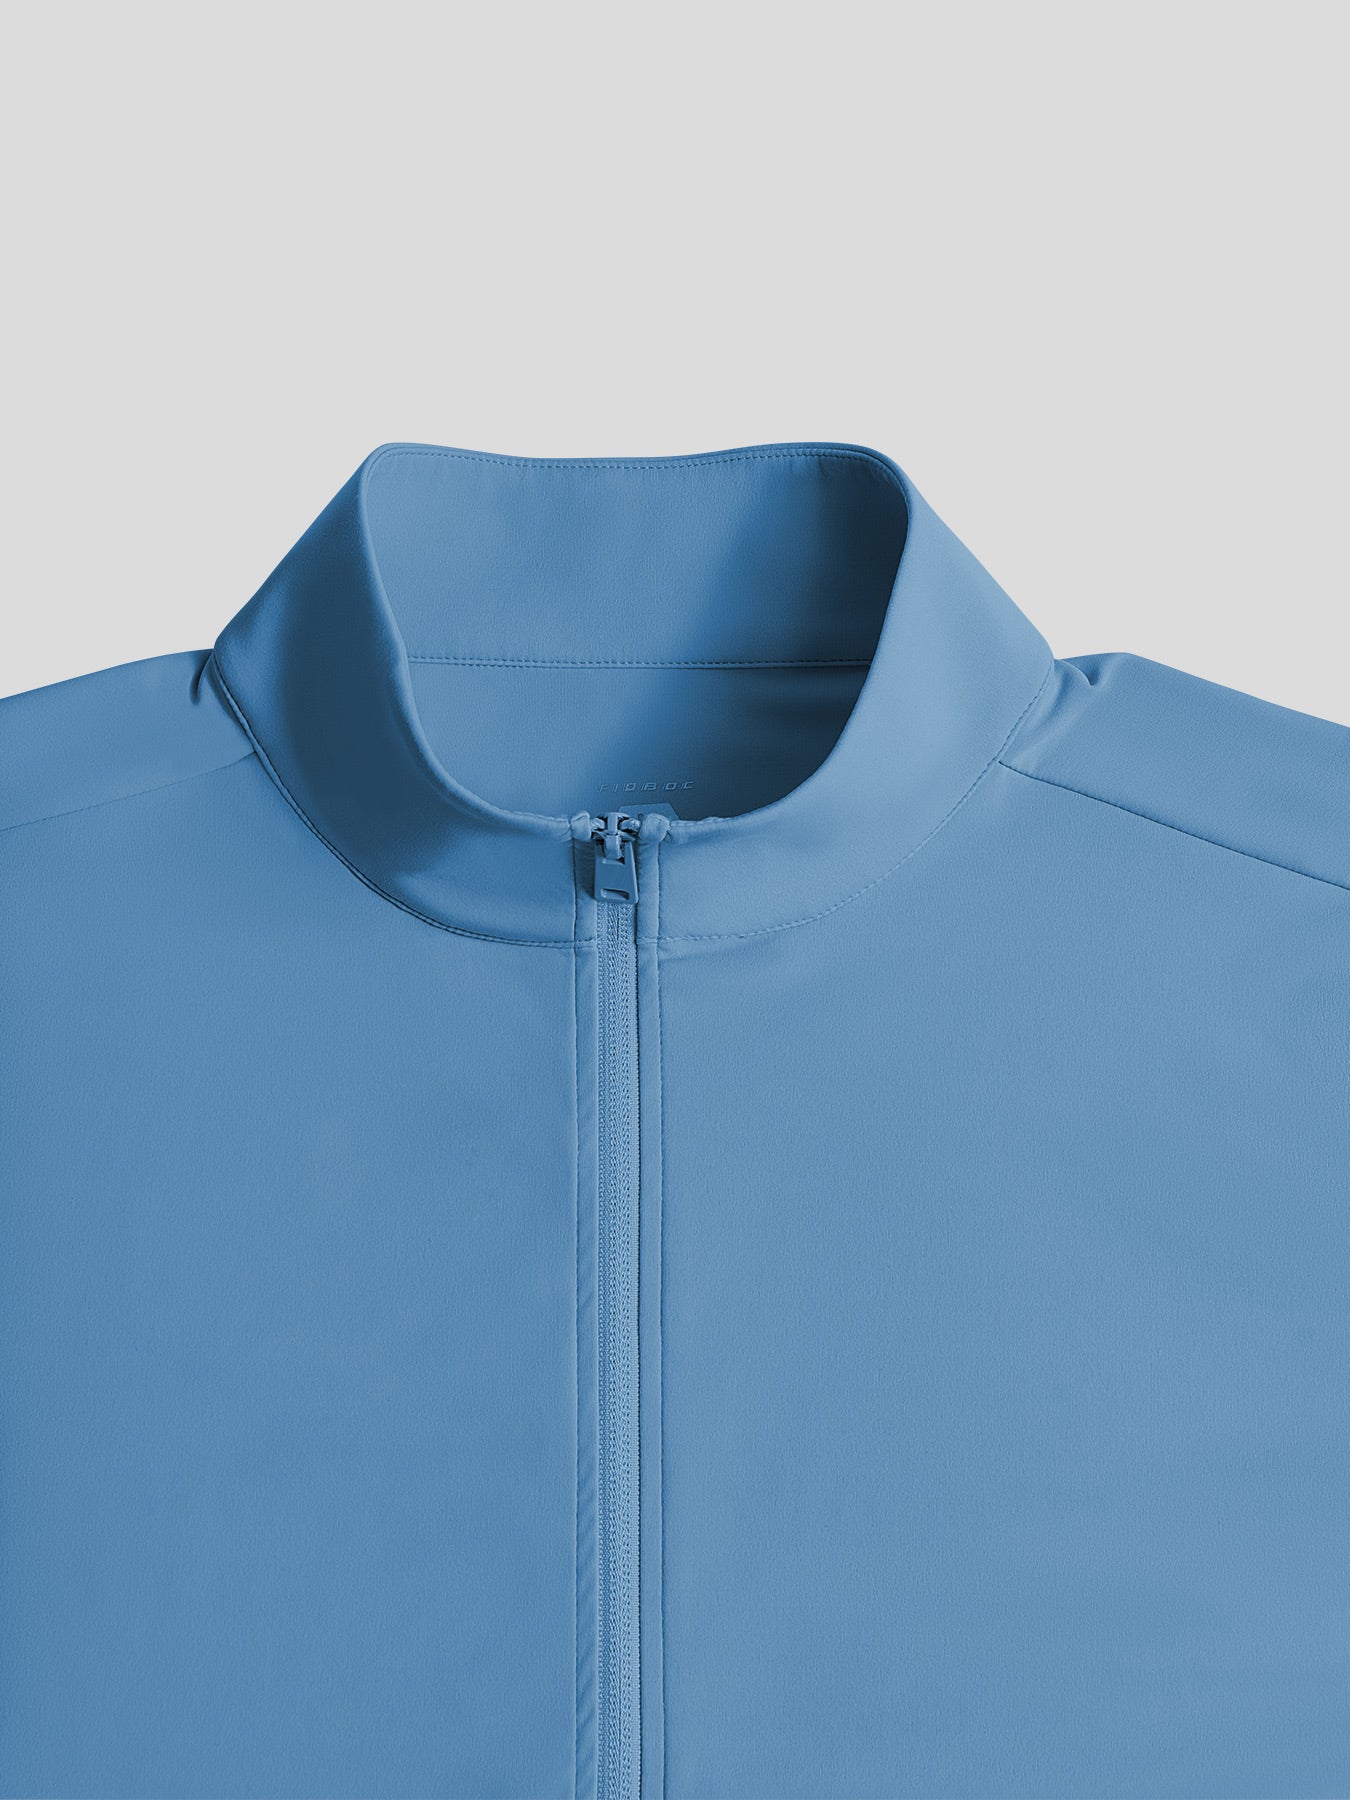 SmoothBlend ElevateMotion Quick Dry Stand Collar Sports Fitness Jacket